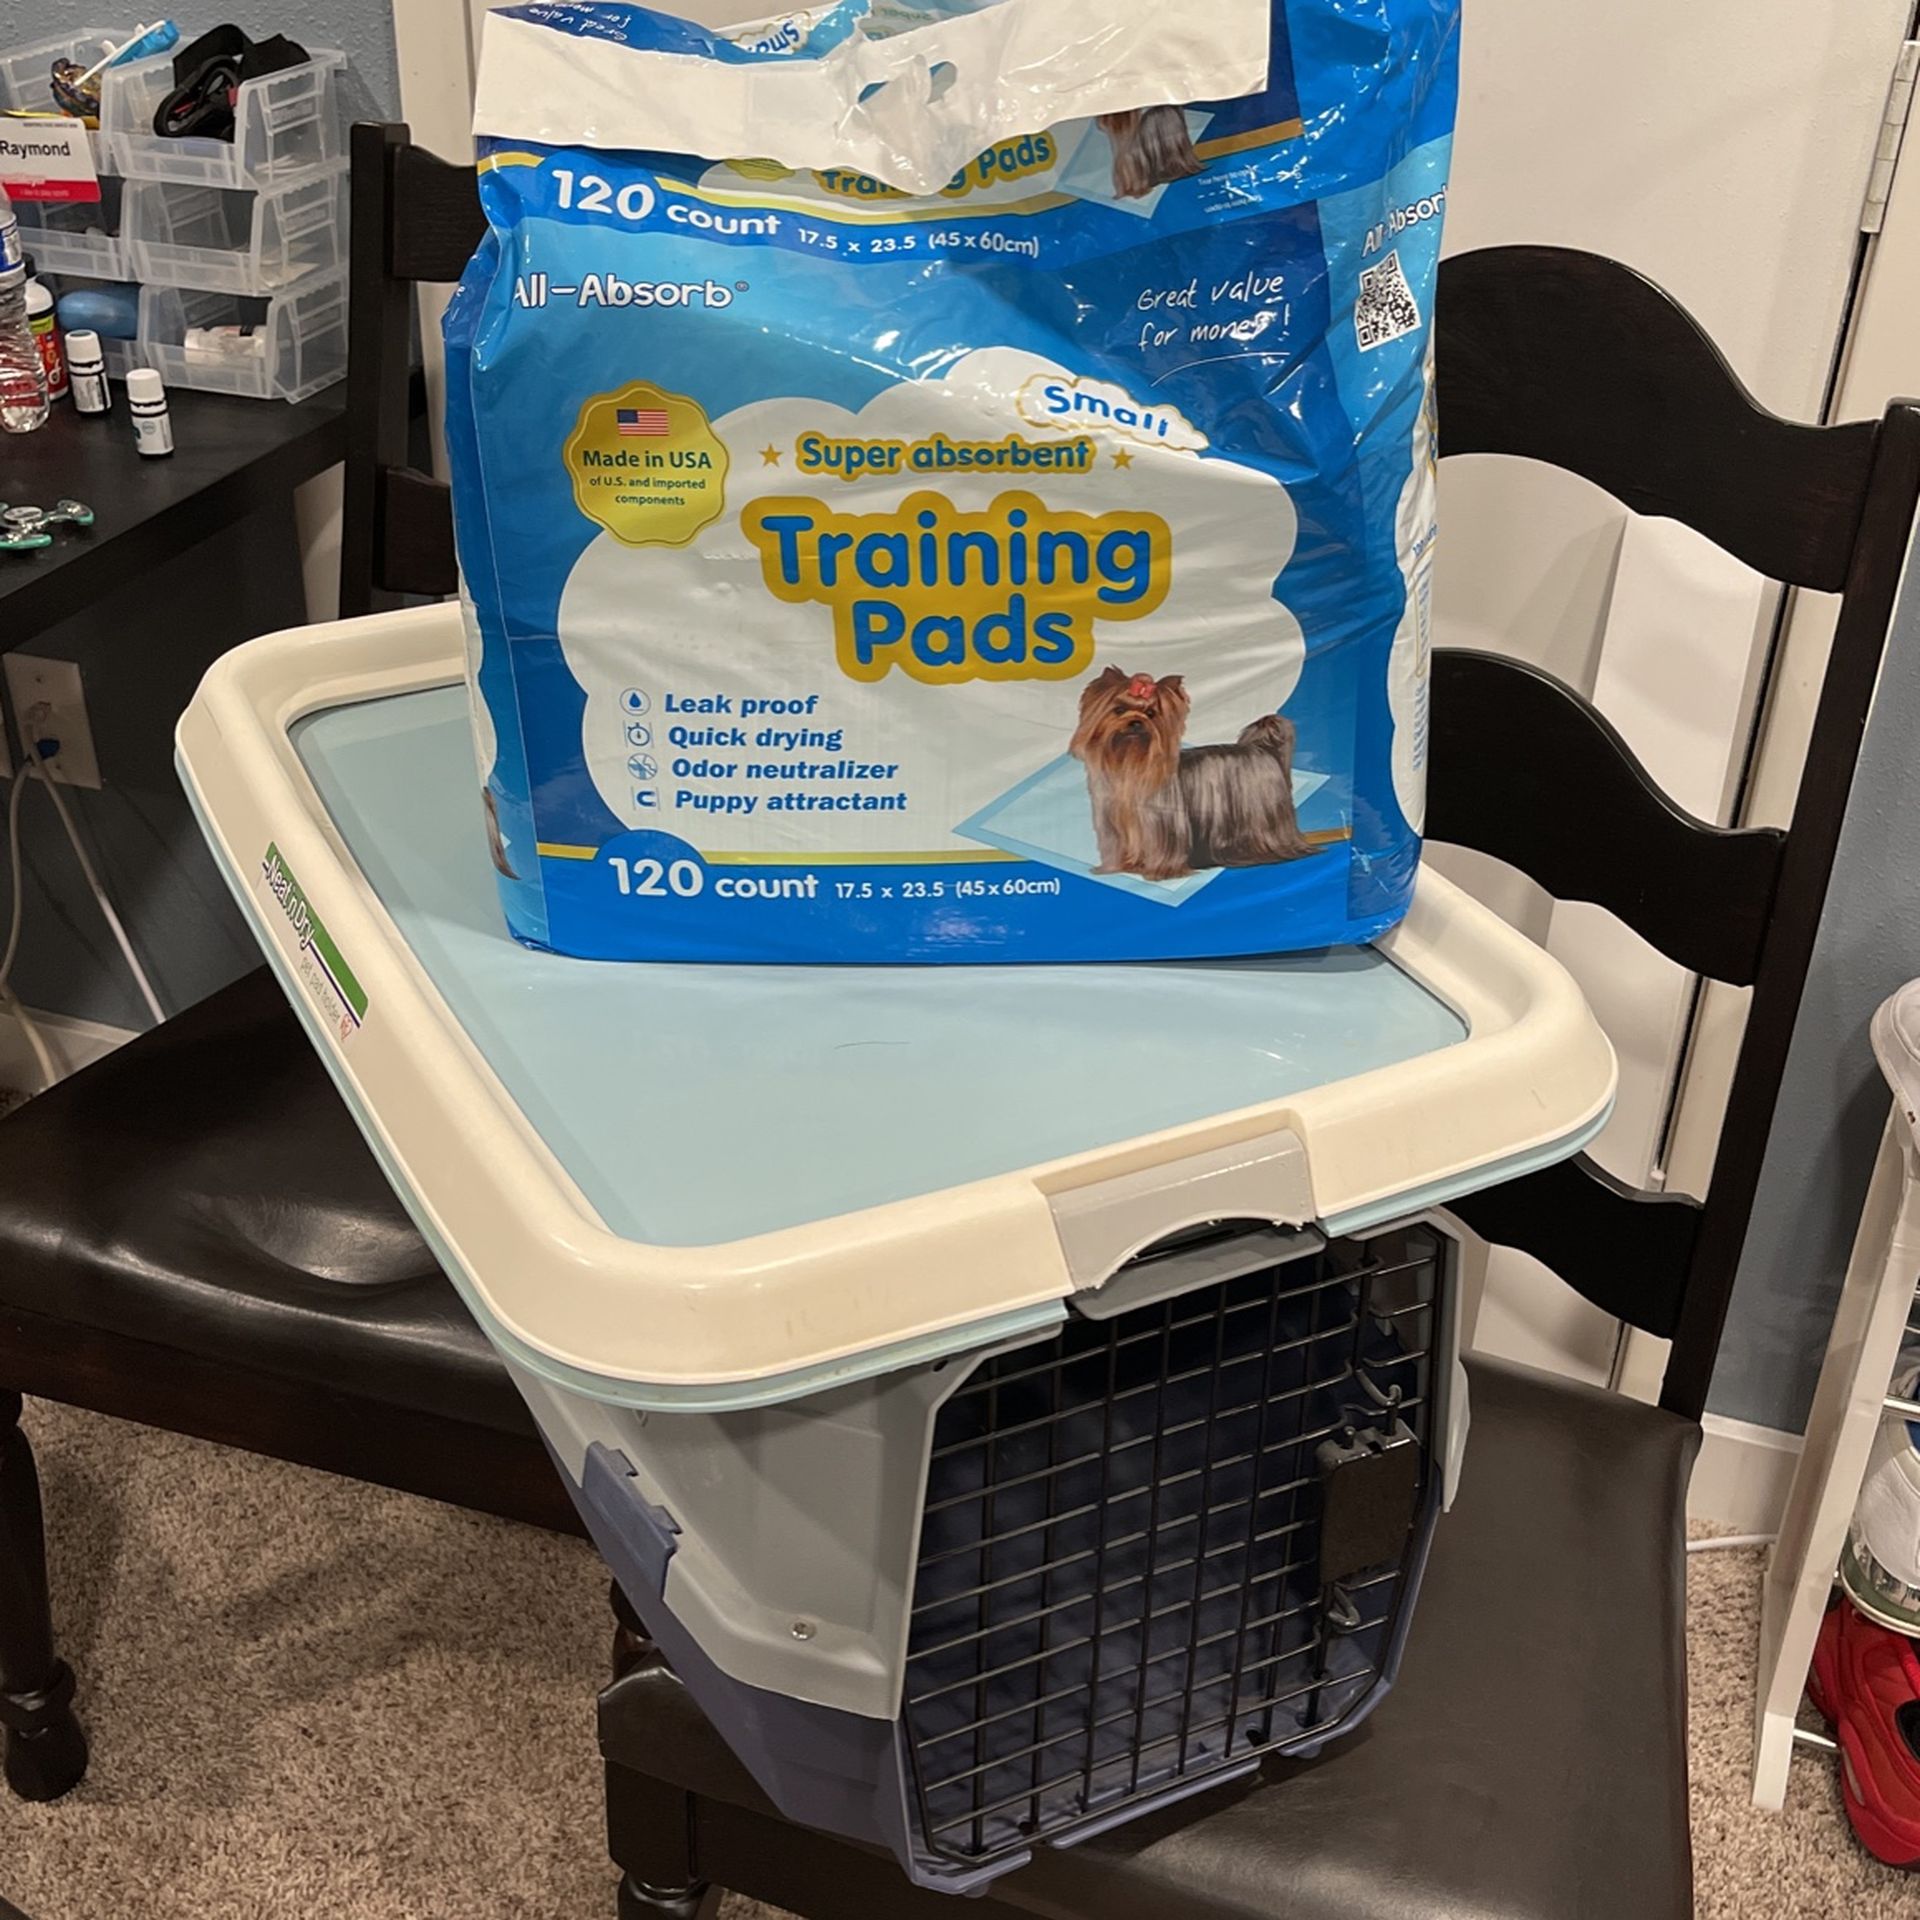 Kennel, Training Pads, And Training Pad Holder